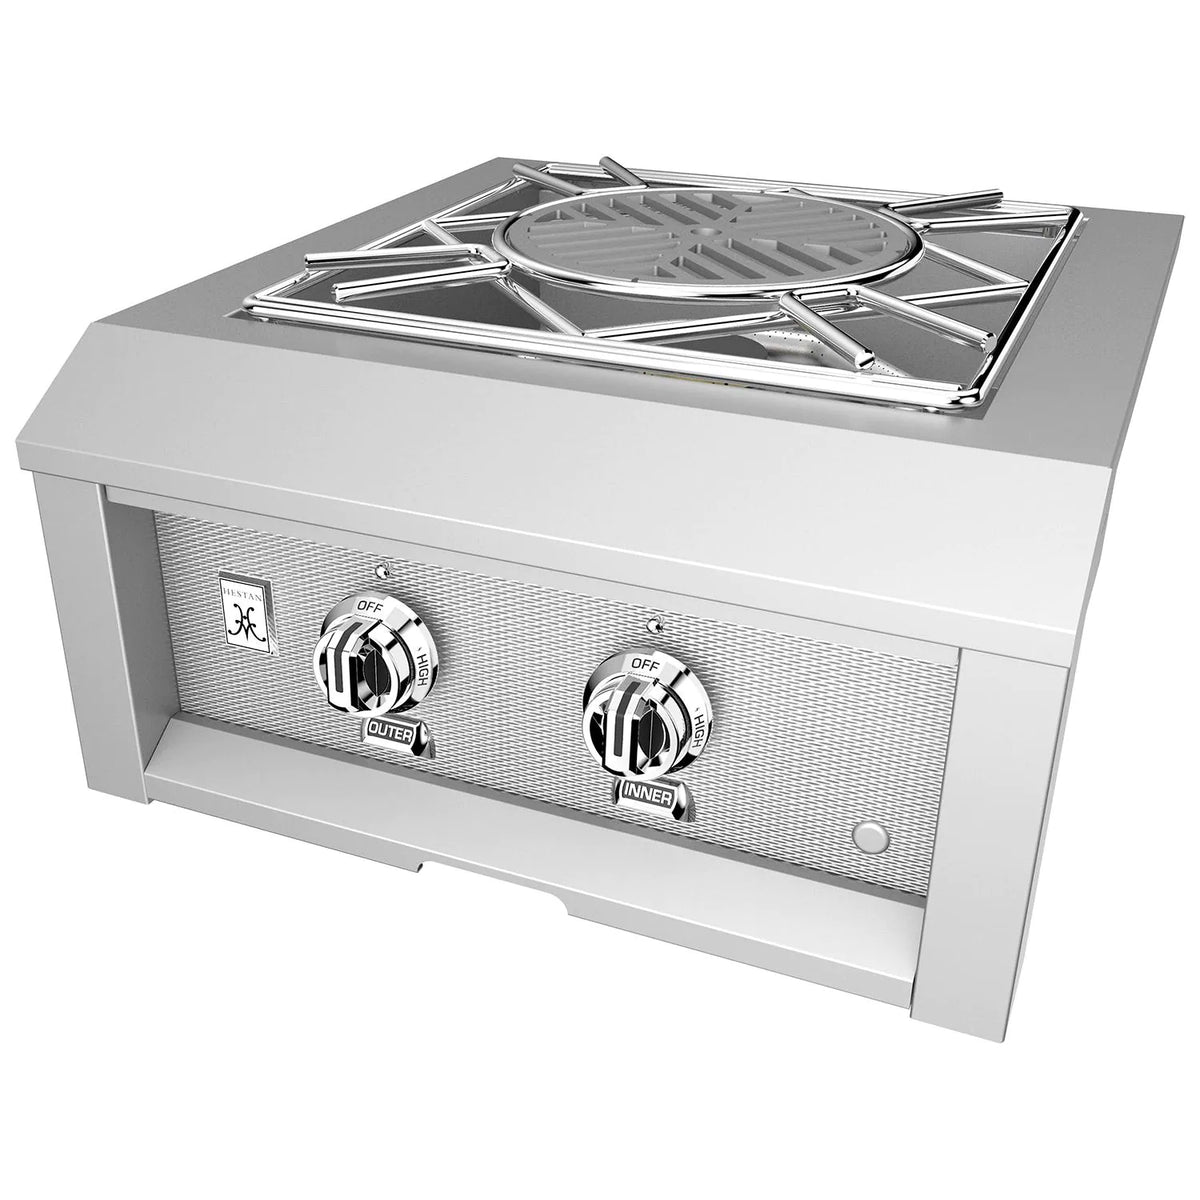 Hestan Built-In Power Burner - Natural Gas - Steeletto - AGPB24-NG-SS